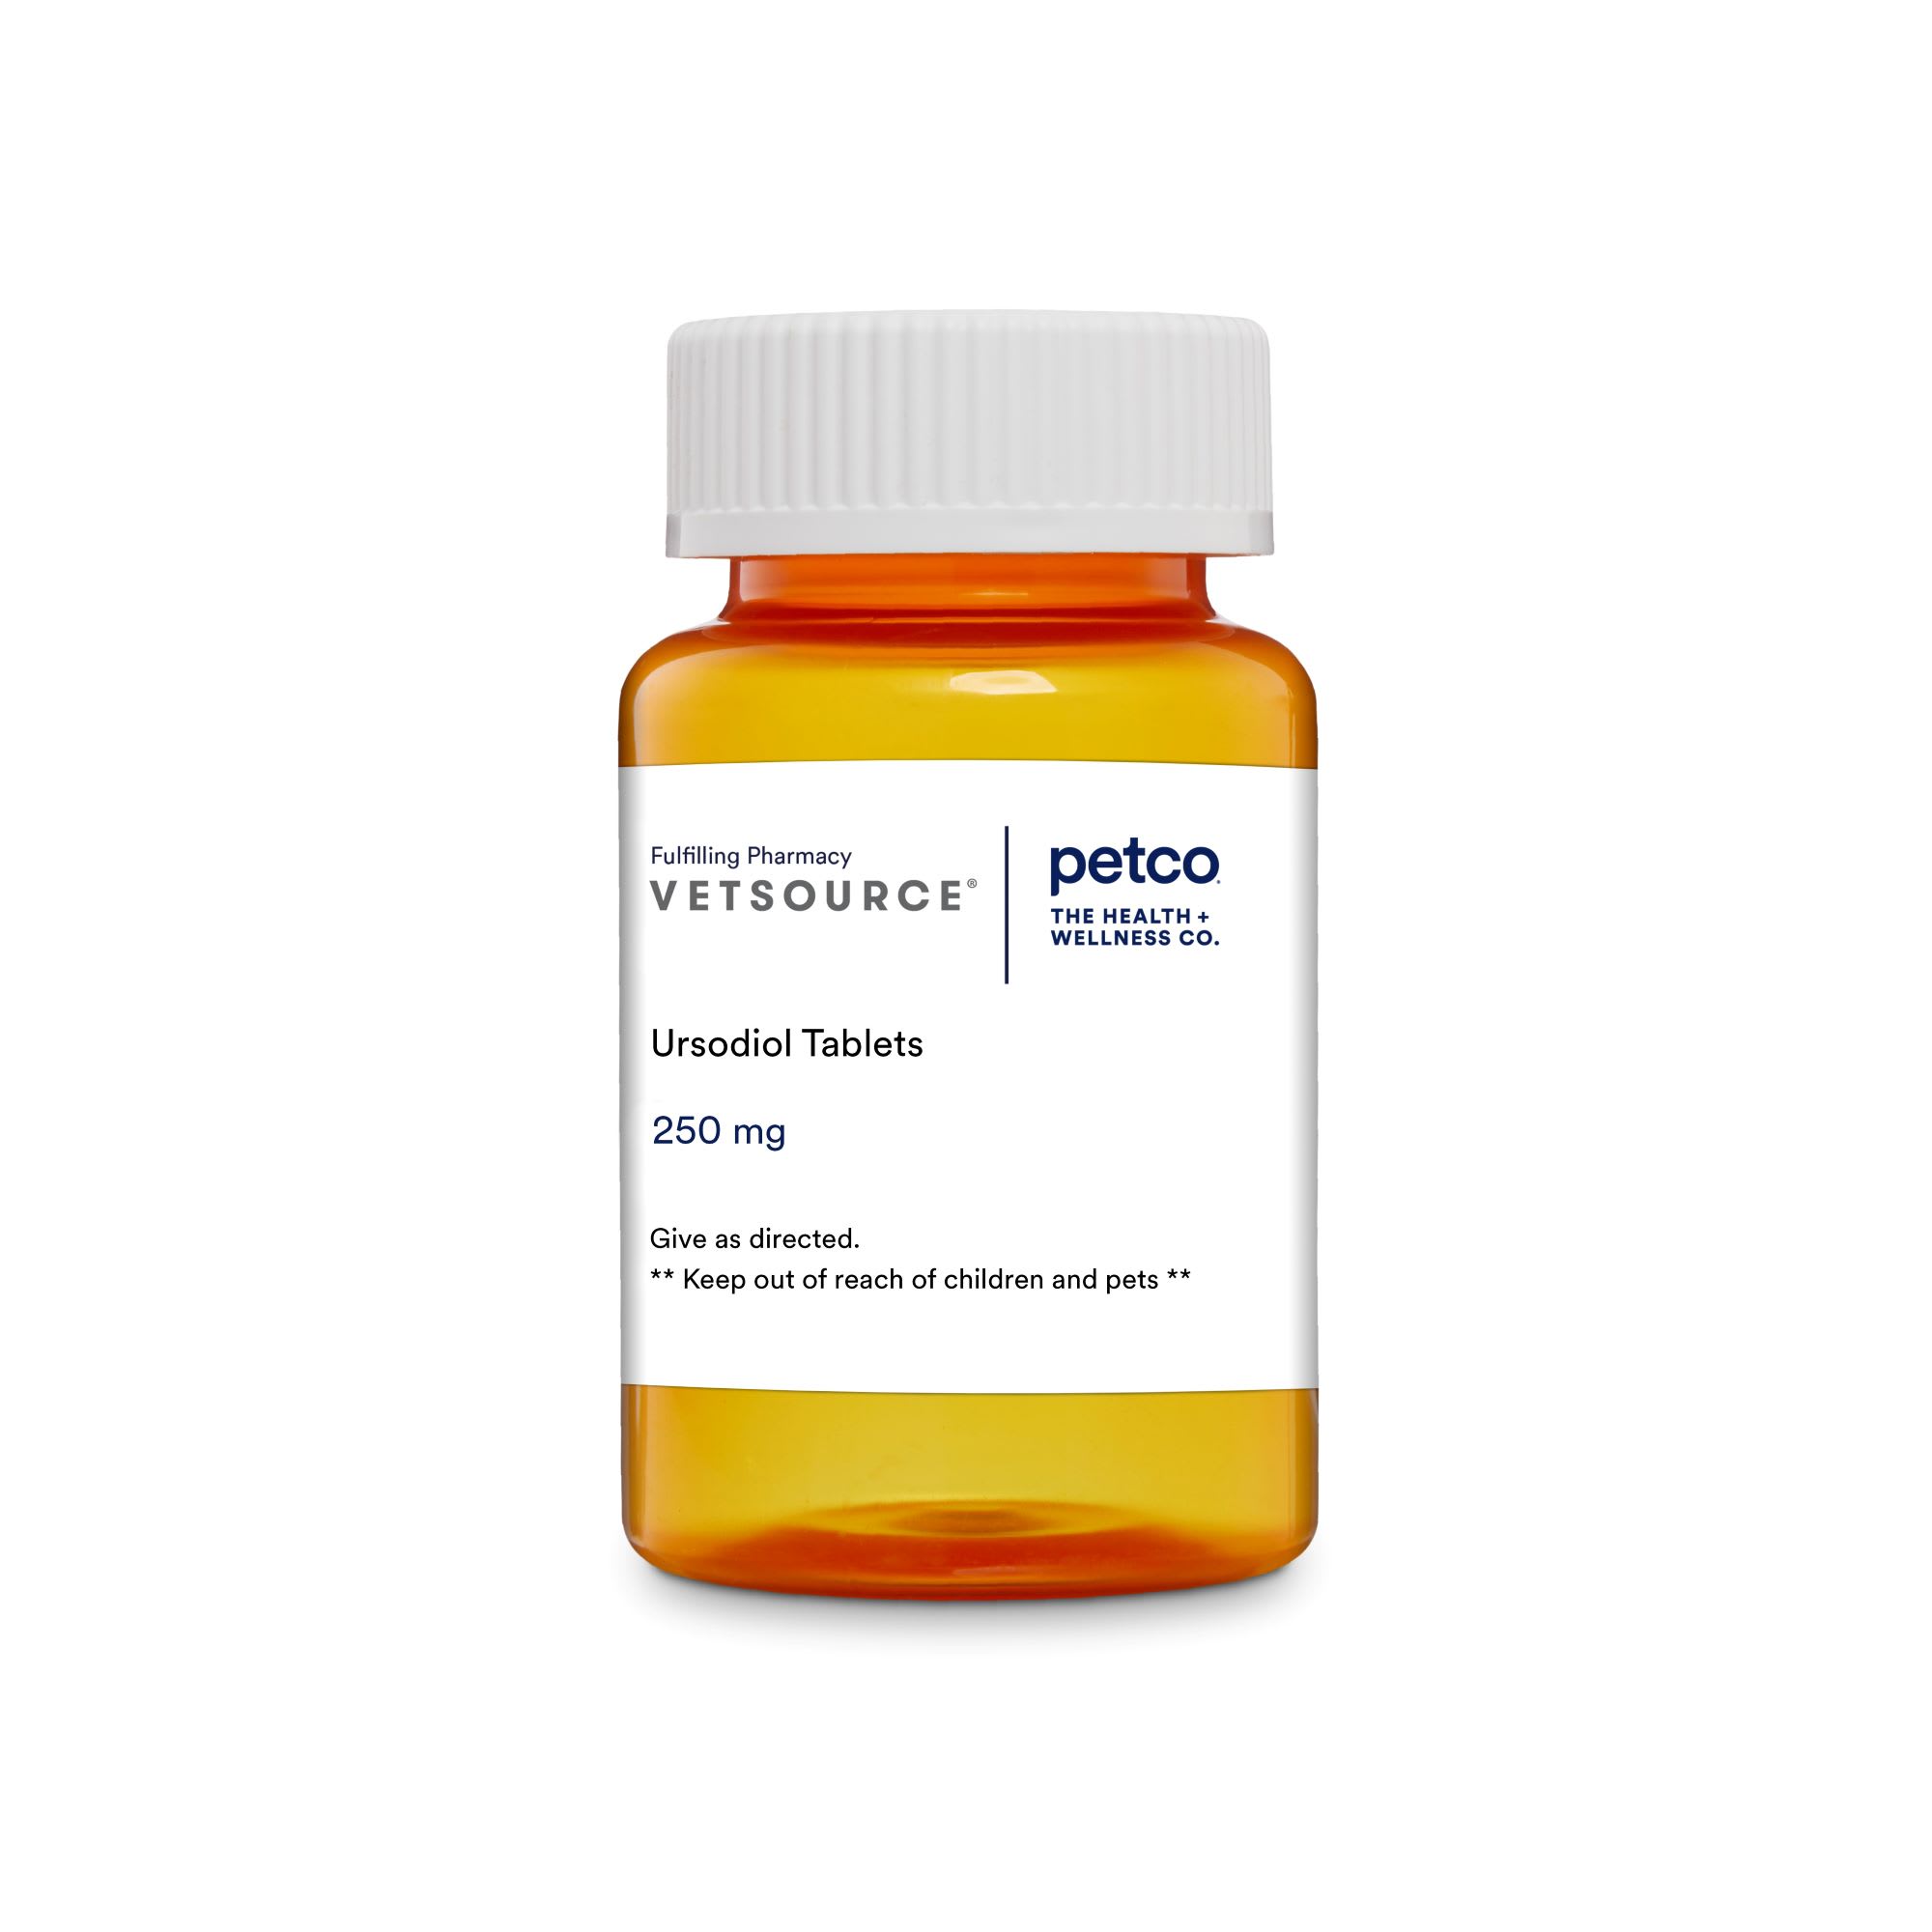 ursodiol-tablets-250-mg-30-count-petco